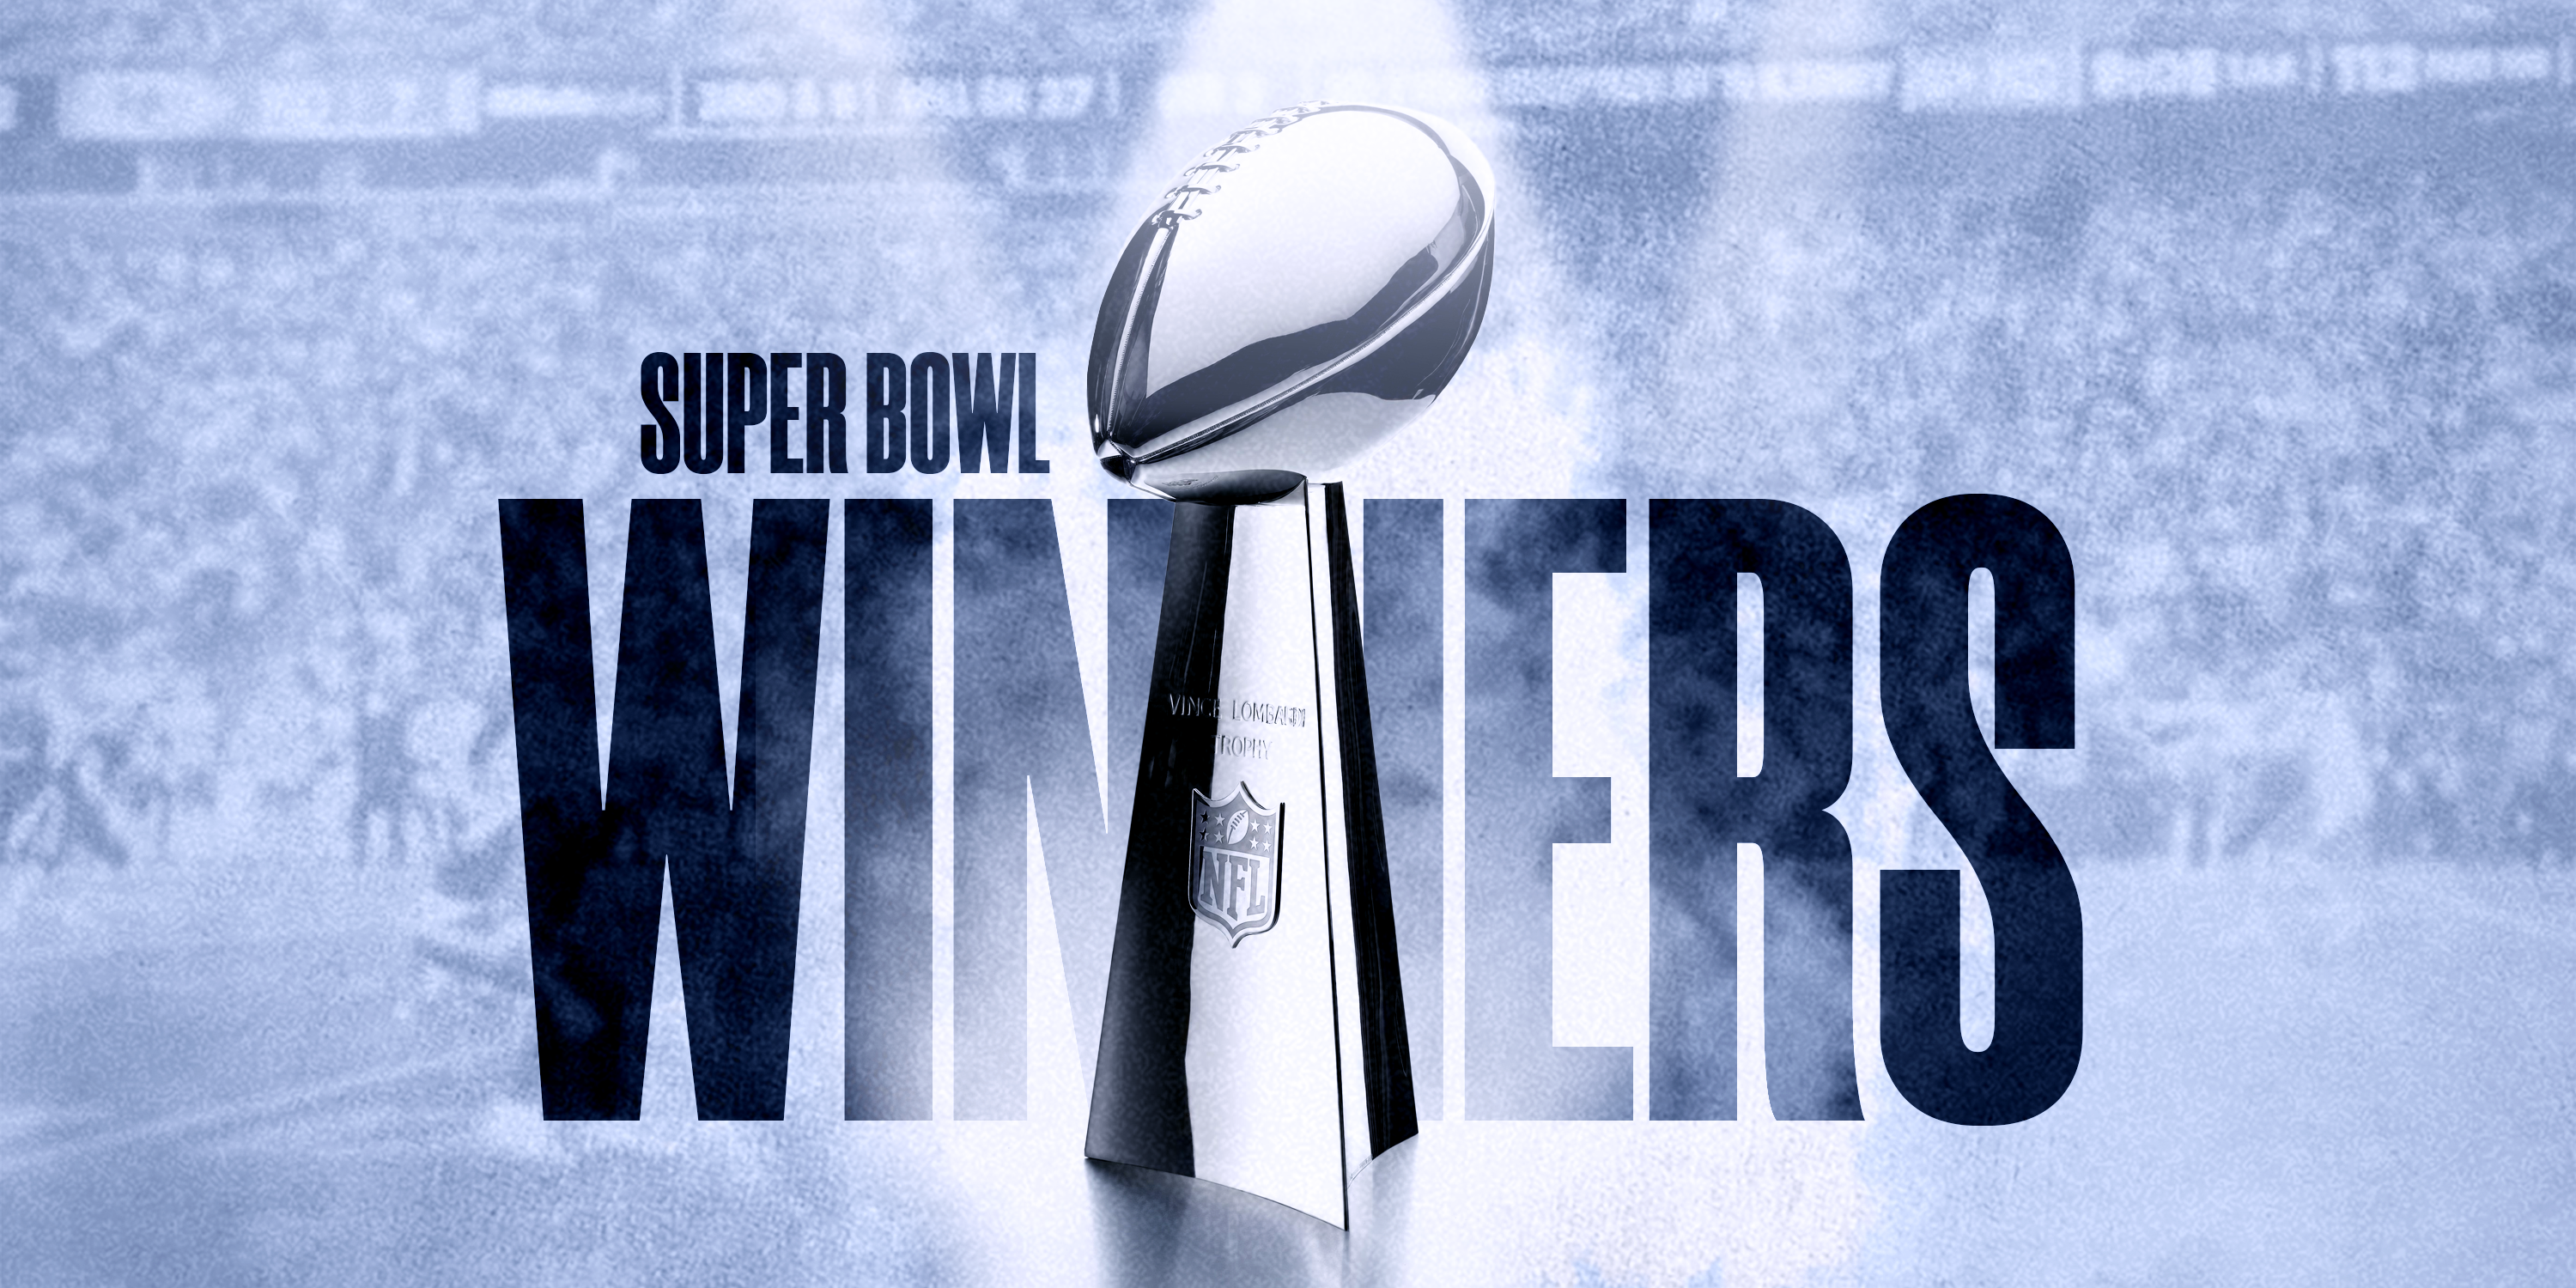 Super Bowl Winners list: Every winning team in NFL until today